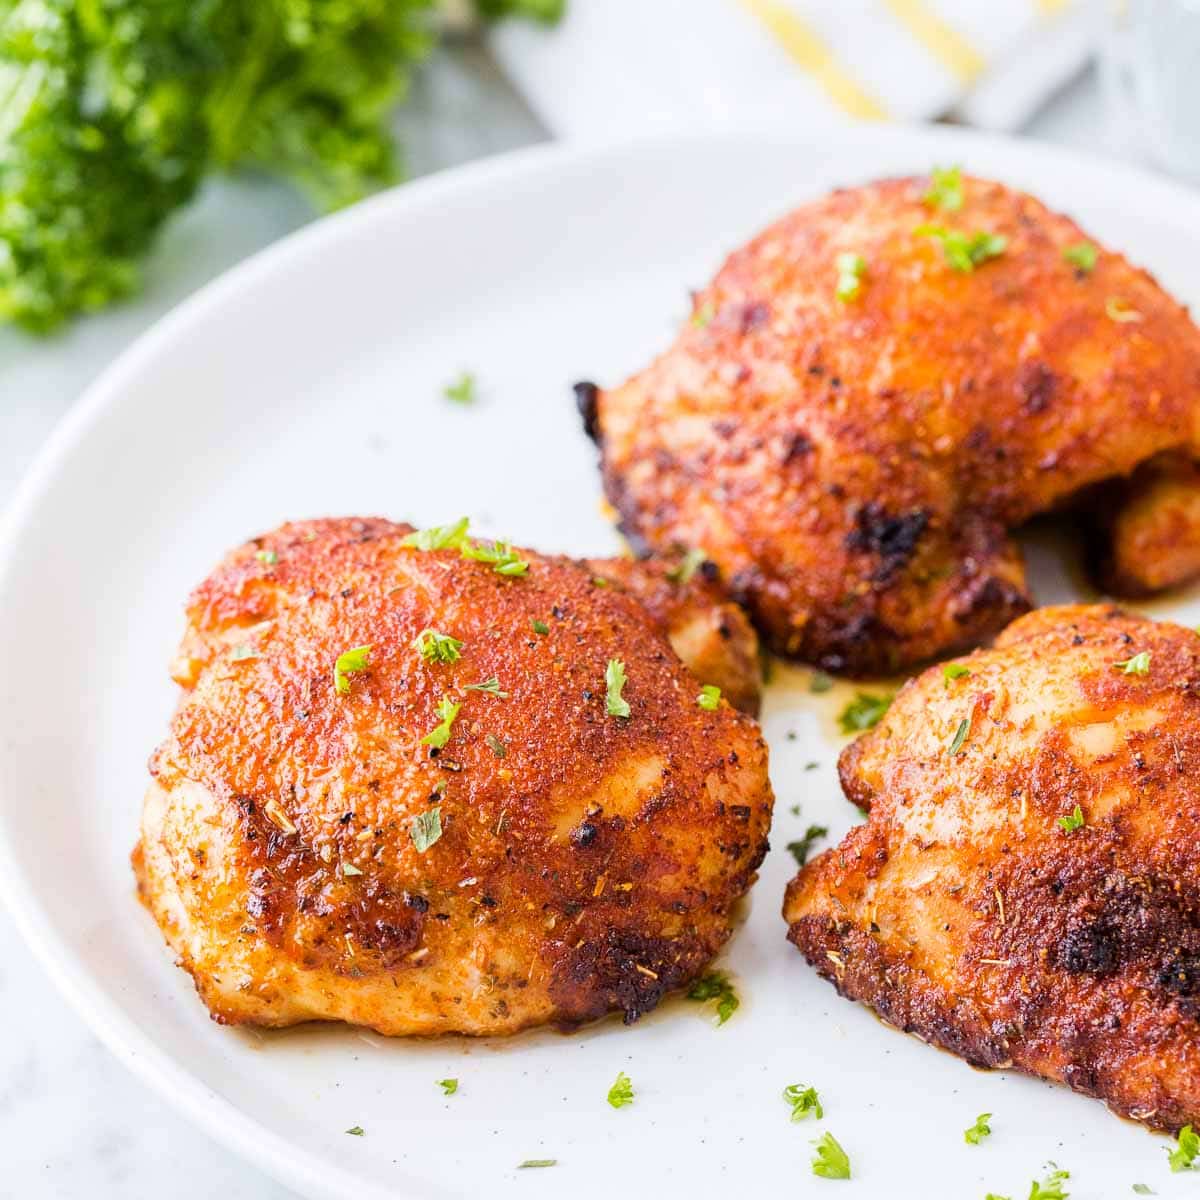 https://platedcravings.com/wp-content/uploads/2020/07/Air-Fryer-Chicken-Thighs-Featured-Plated-Cravings-1.jpg